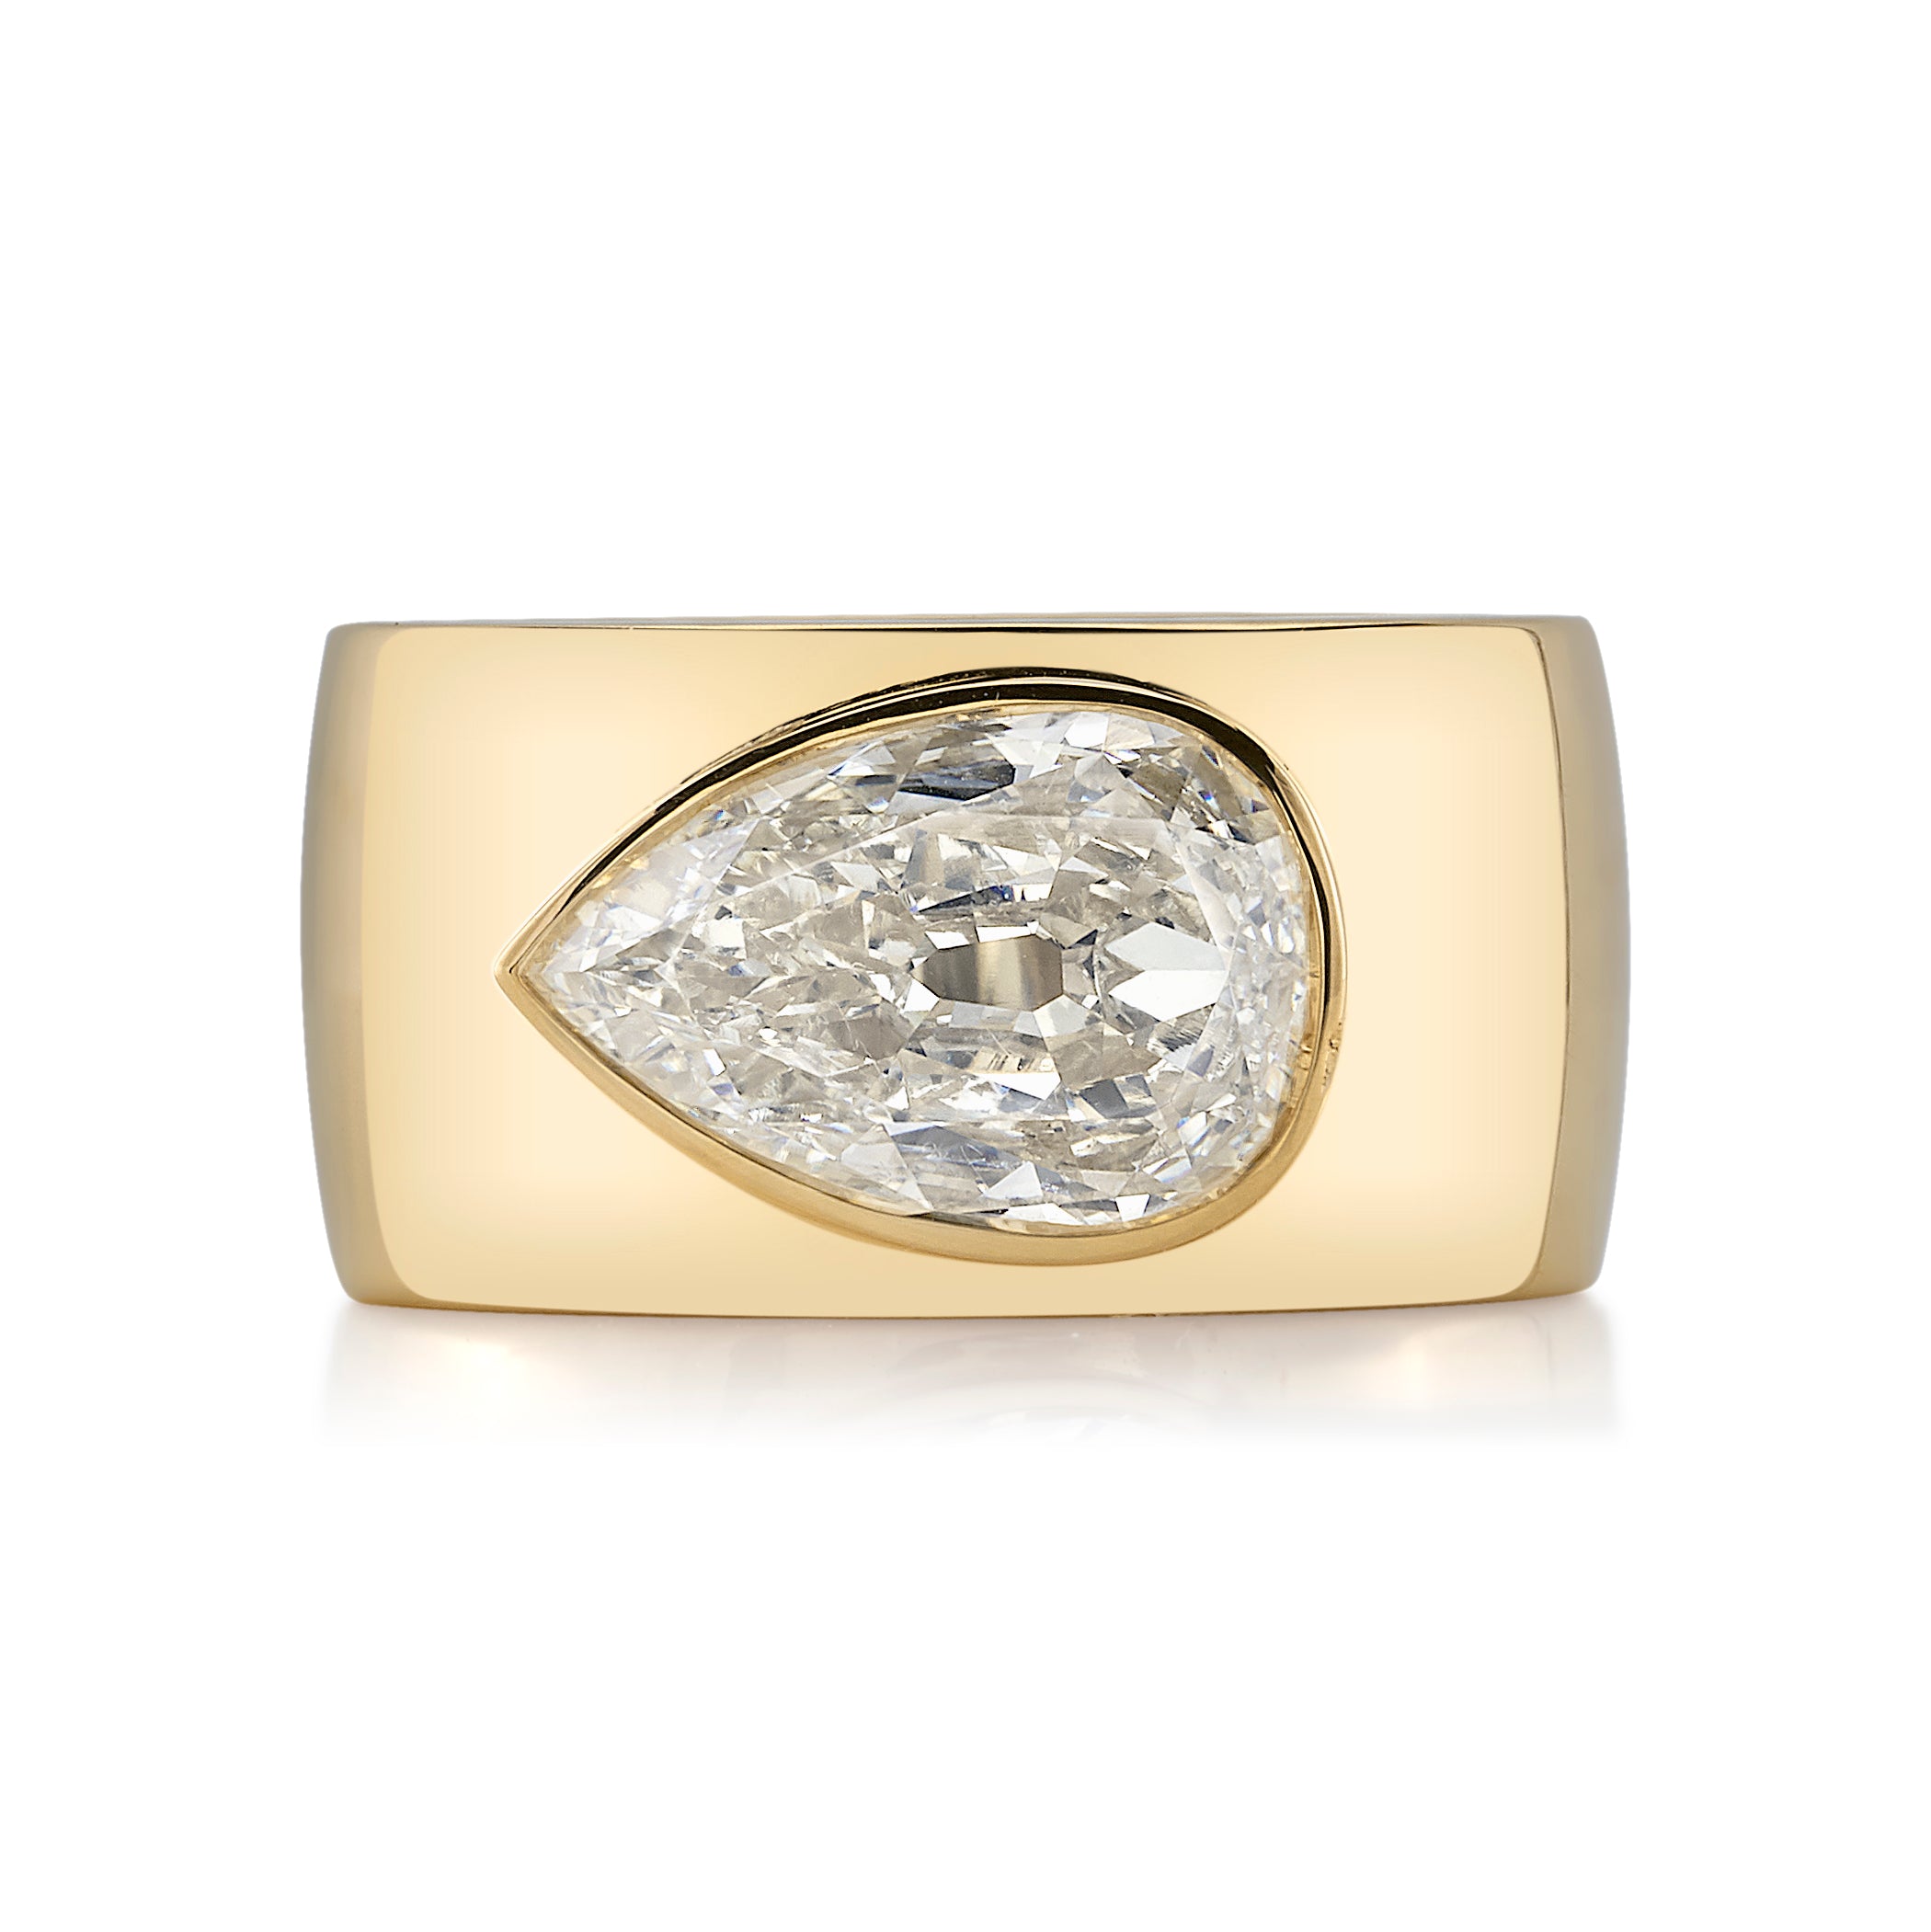 SINGLE STONE MISHA RING featuring 3.02ct L/VS1 GIA certified antique pear shaped diamond set in a handcrafted 18K yellow gold mounting.